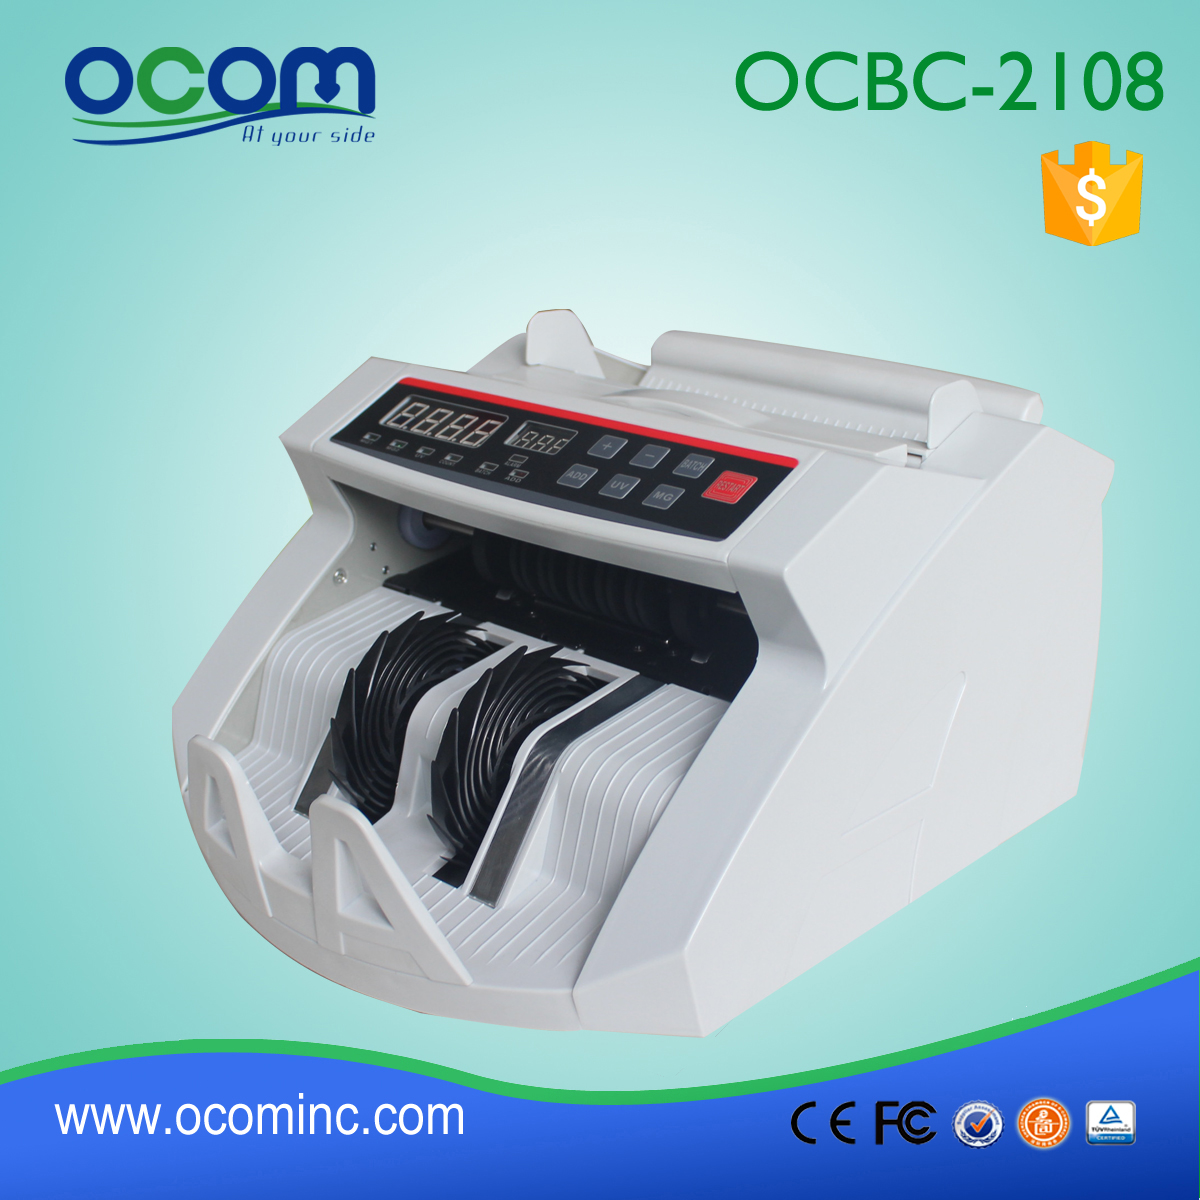 OCBC-2108 Cash Note Counting Currency Machine